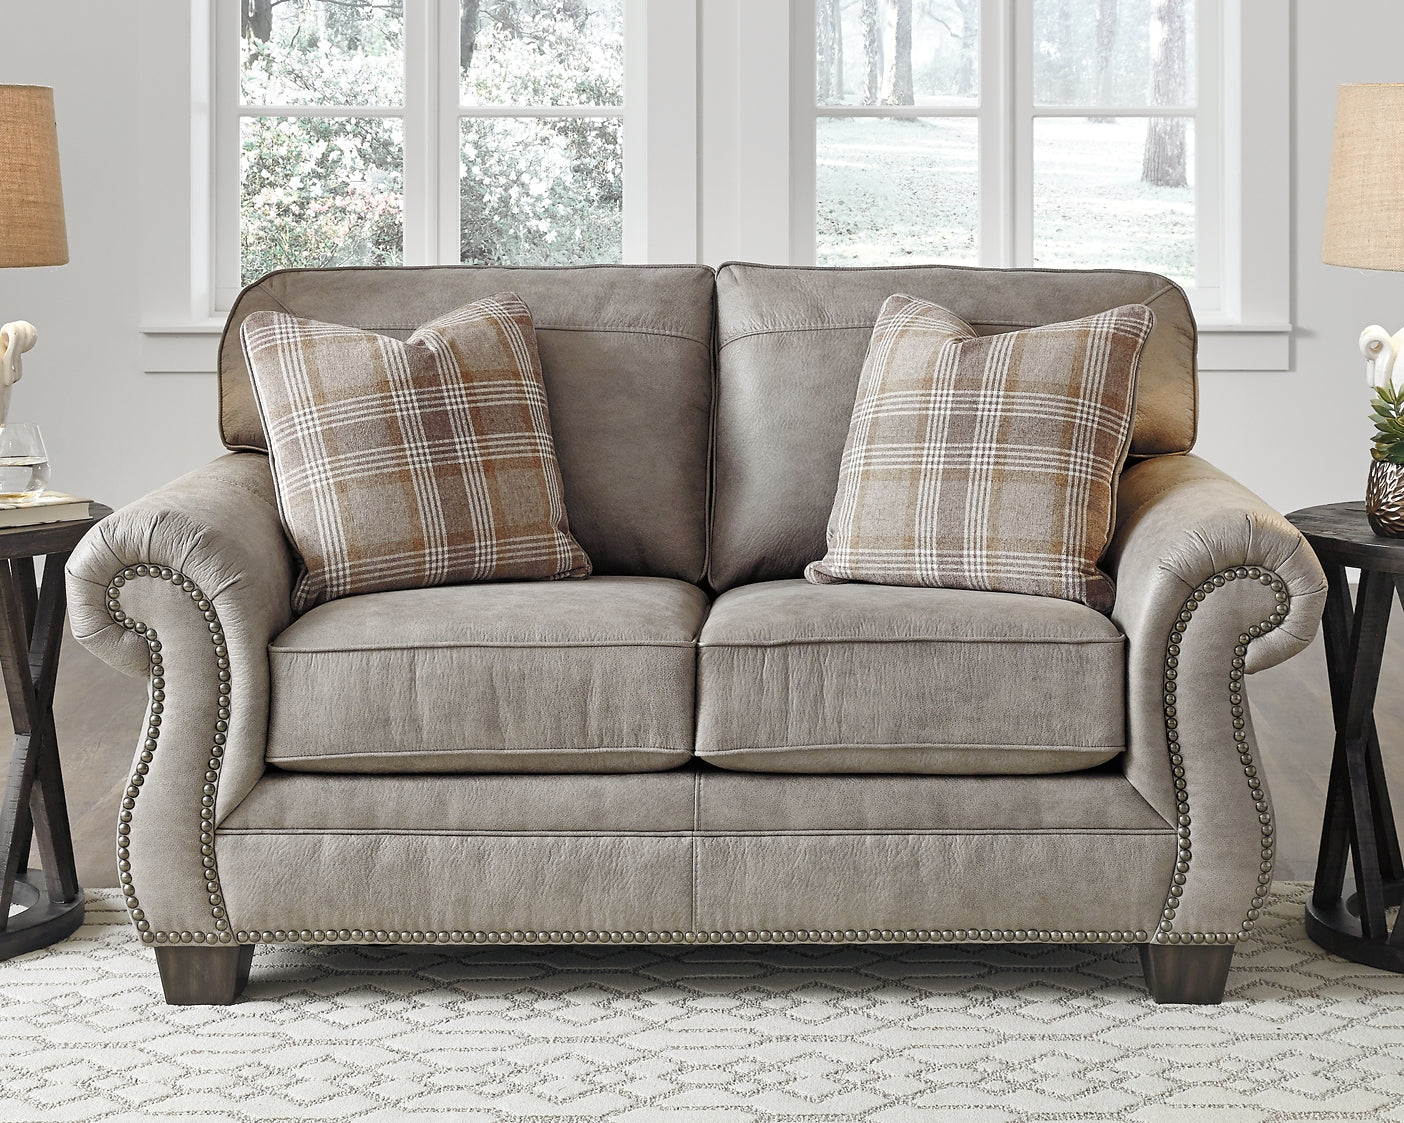 Olsberg Sofa and Loveseat at Walker Mattress and Furniture Locations in Cedar Park and Belton TX.